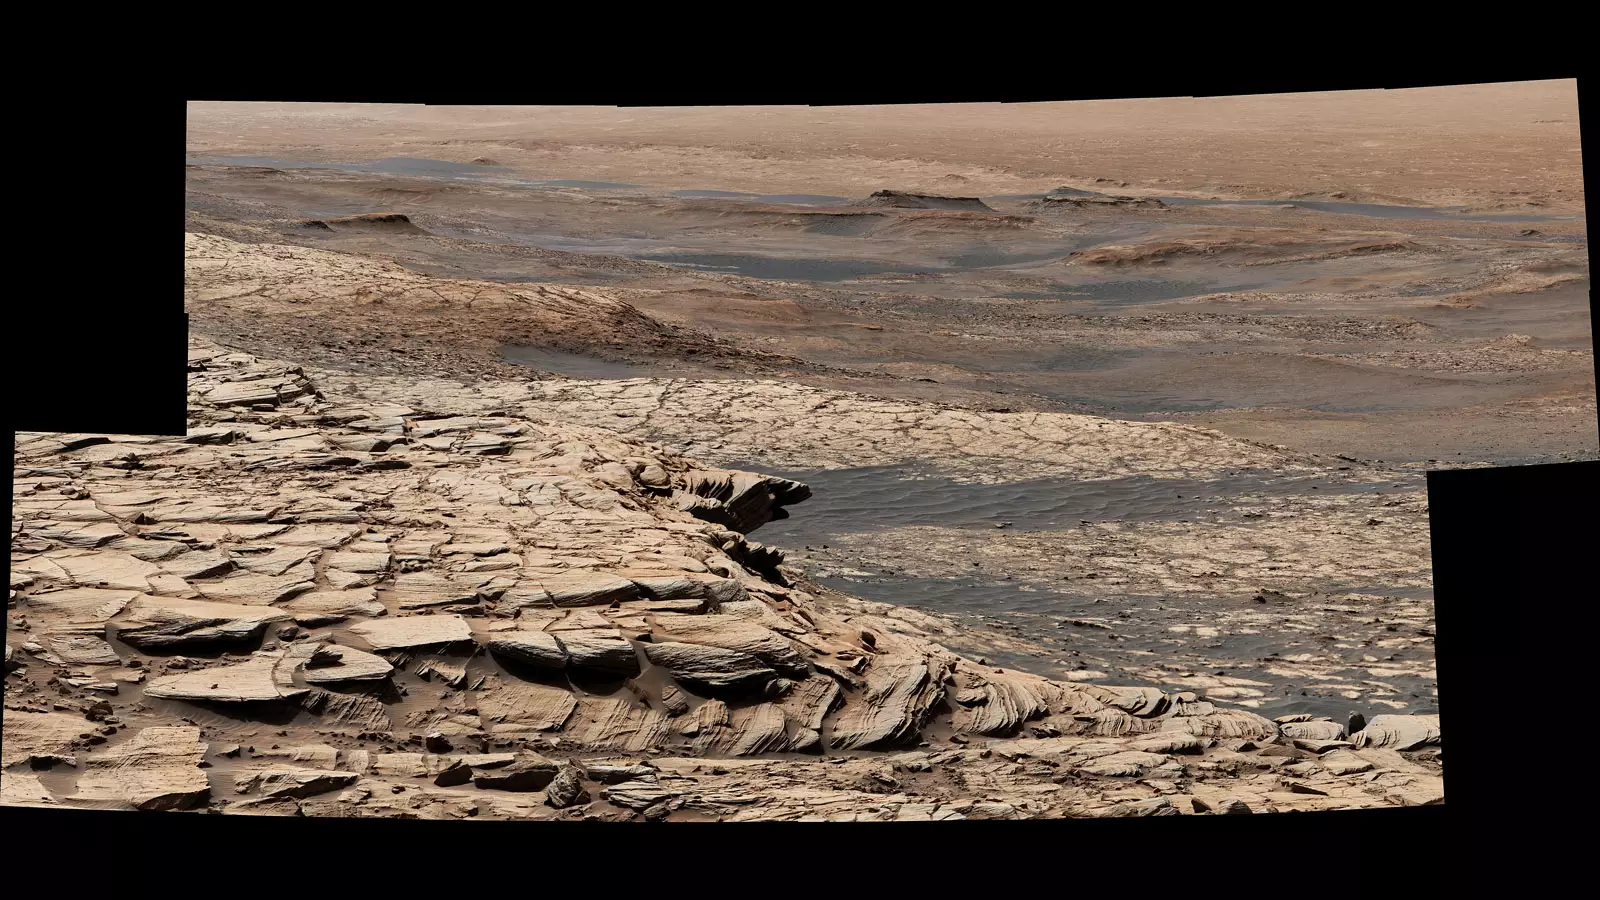 A stitched up photo from NASA of the surface of Mars.